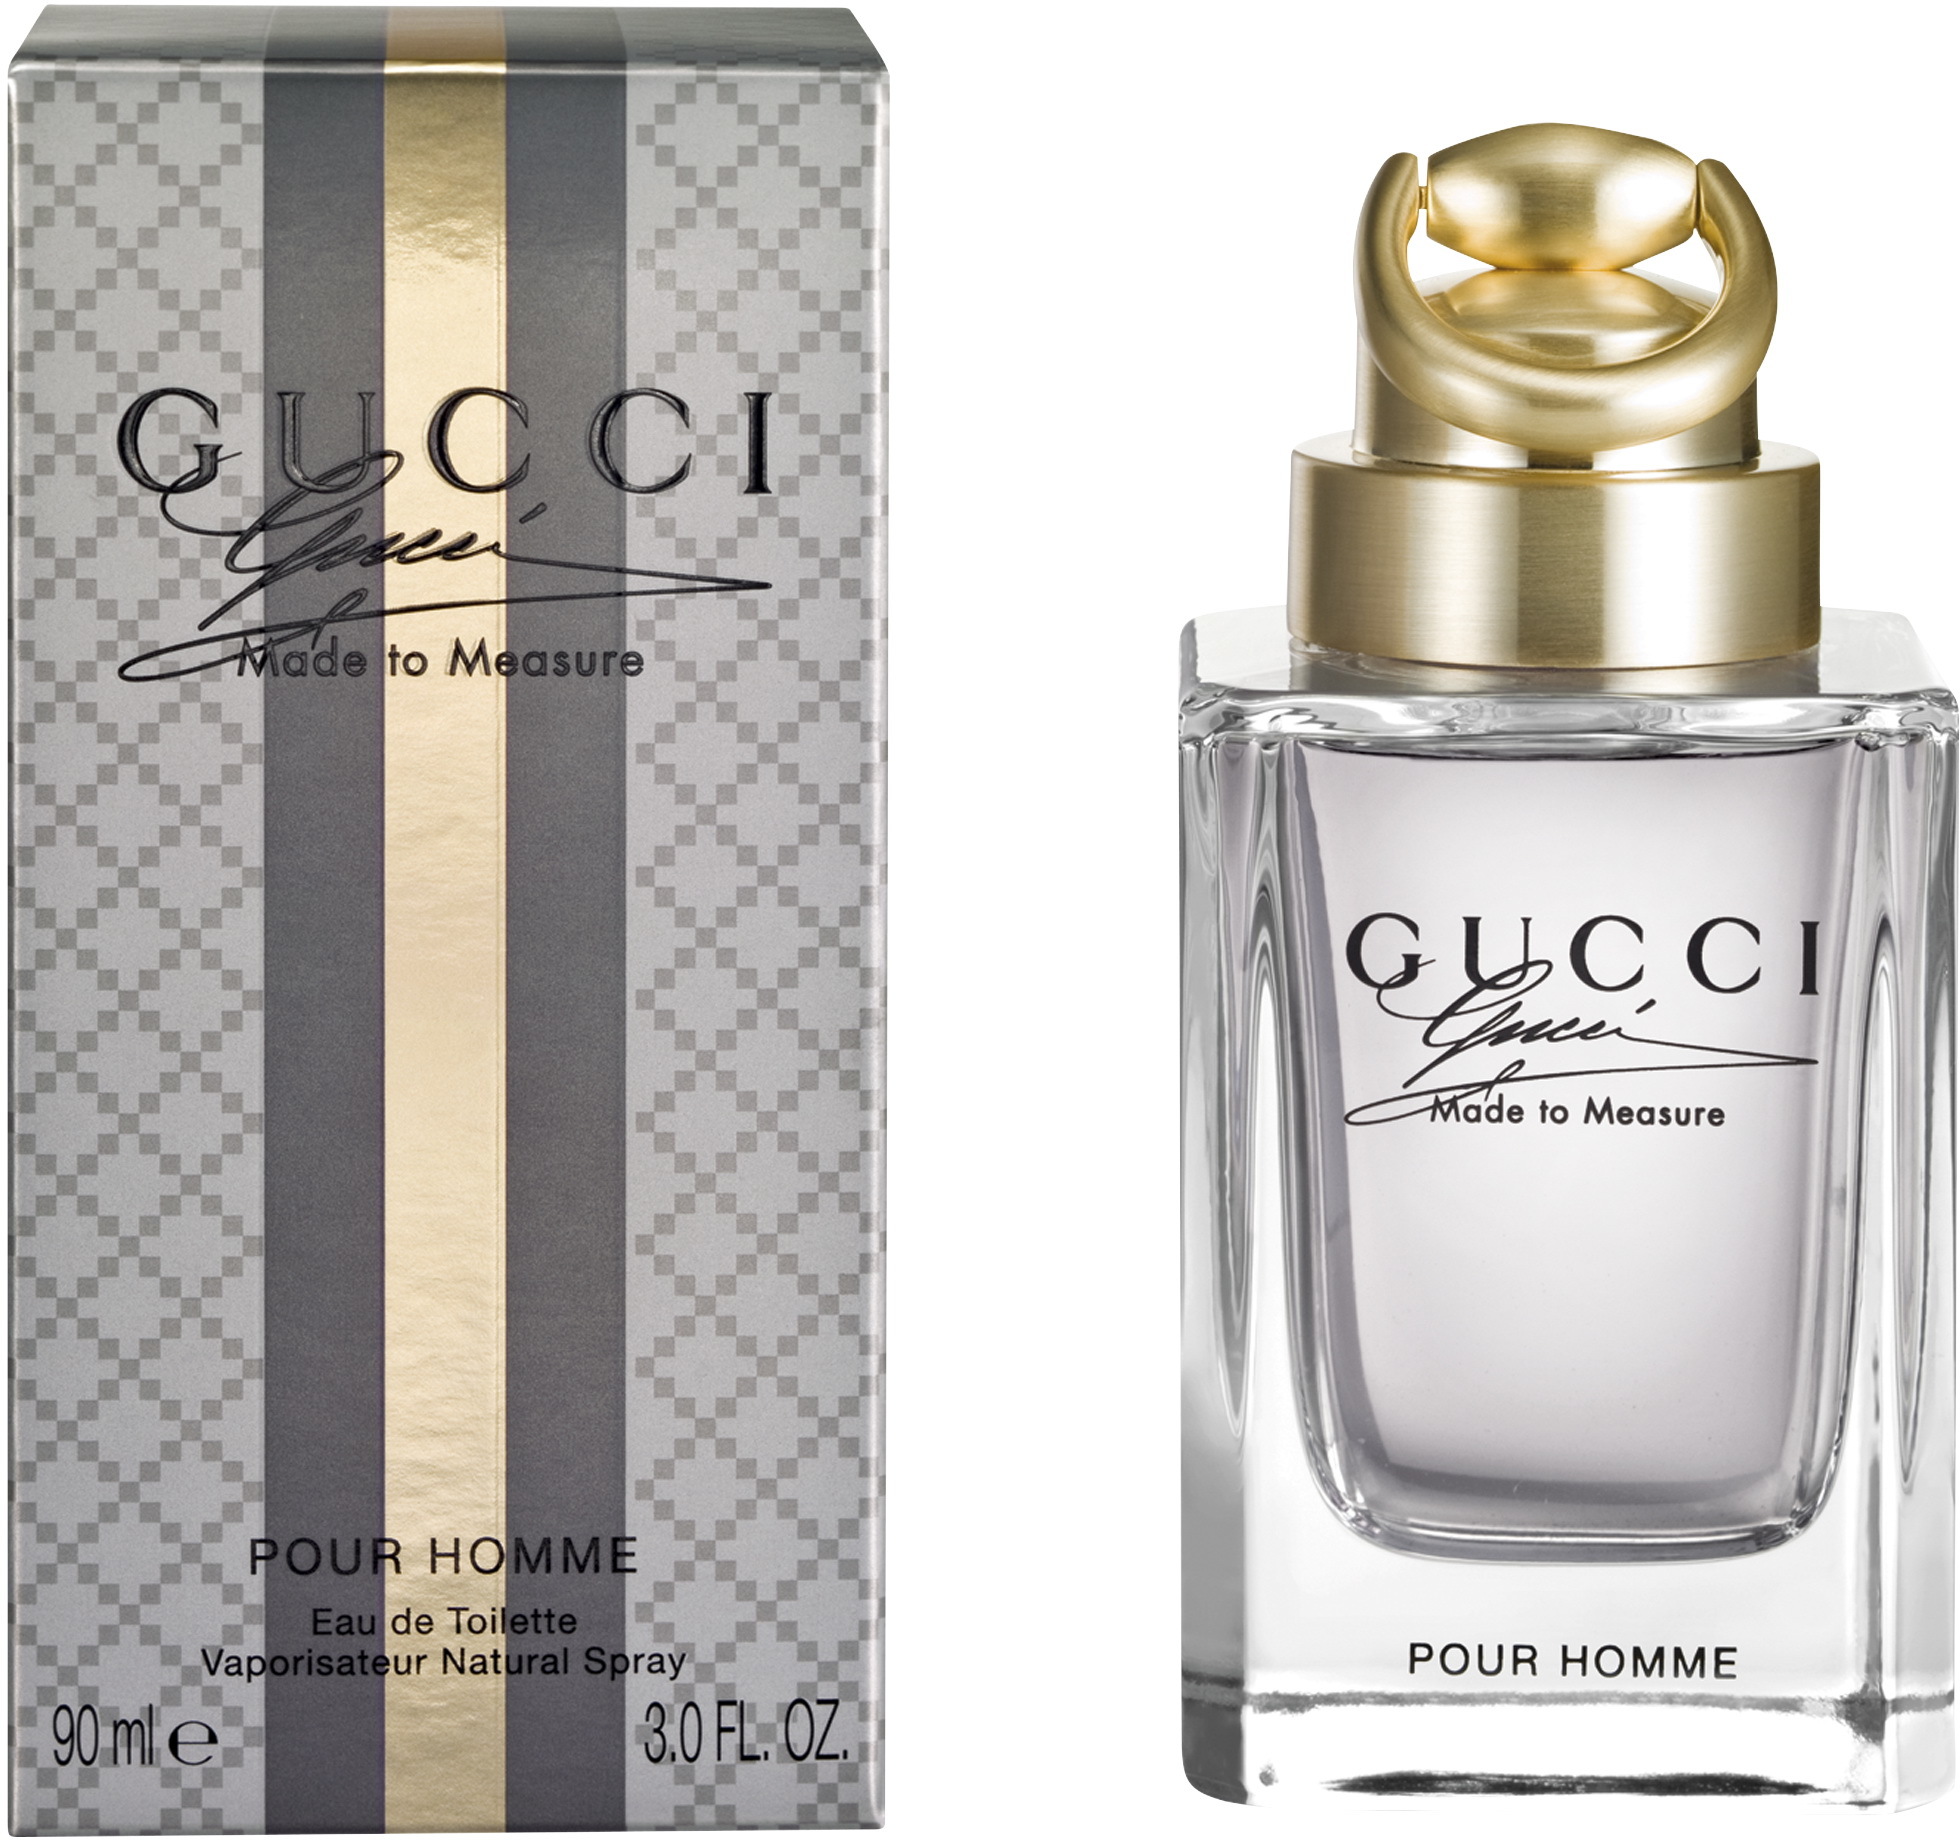 parfum gucci made to measure